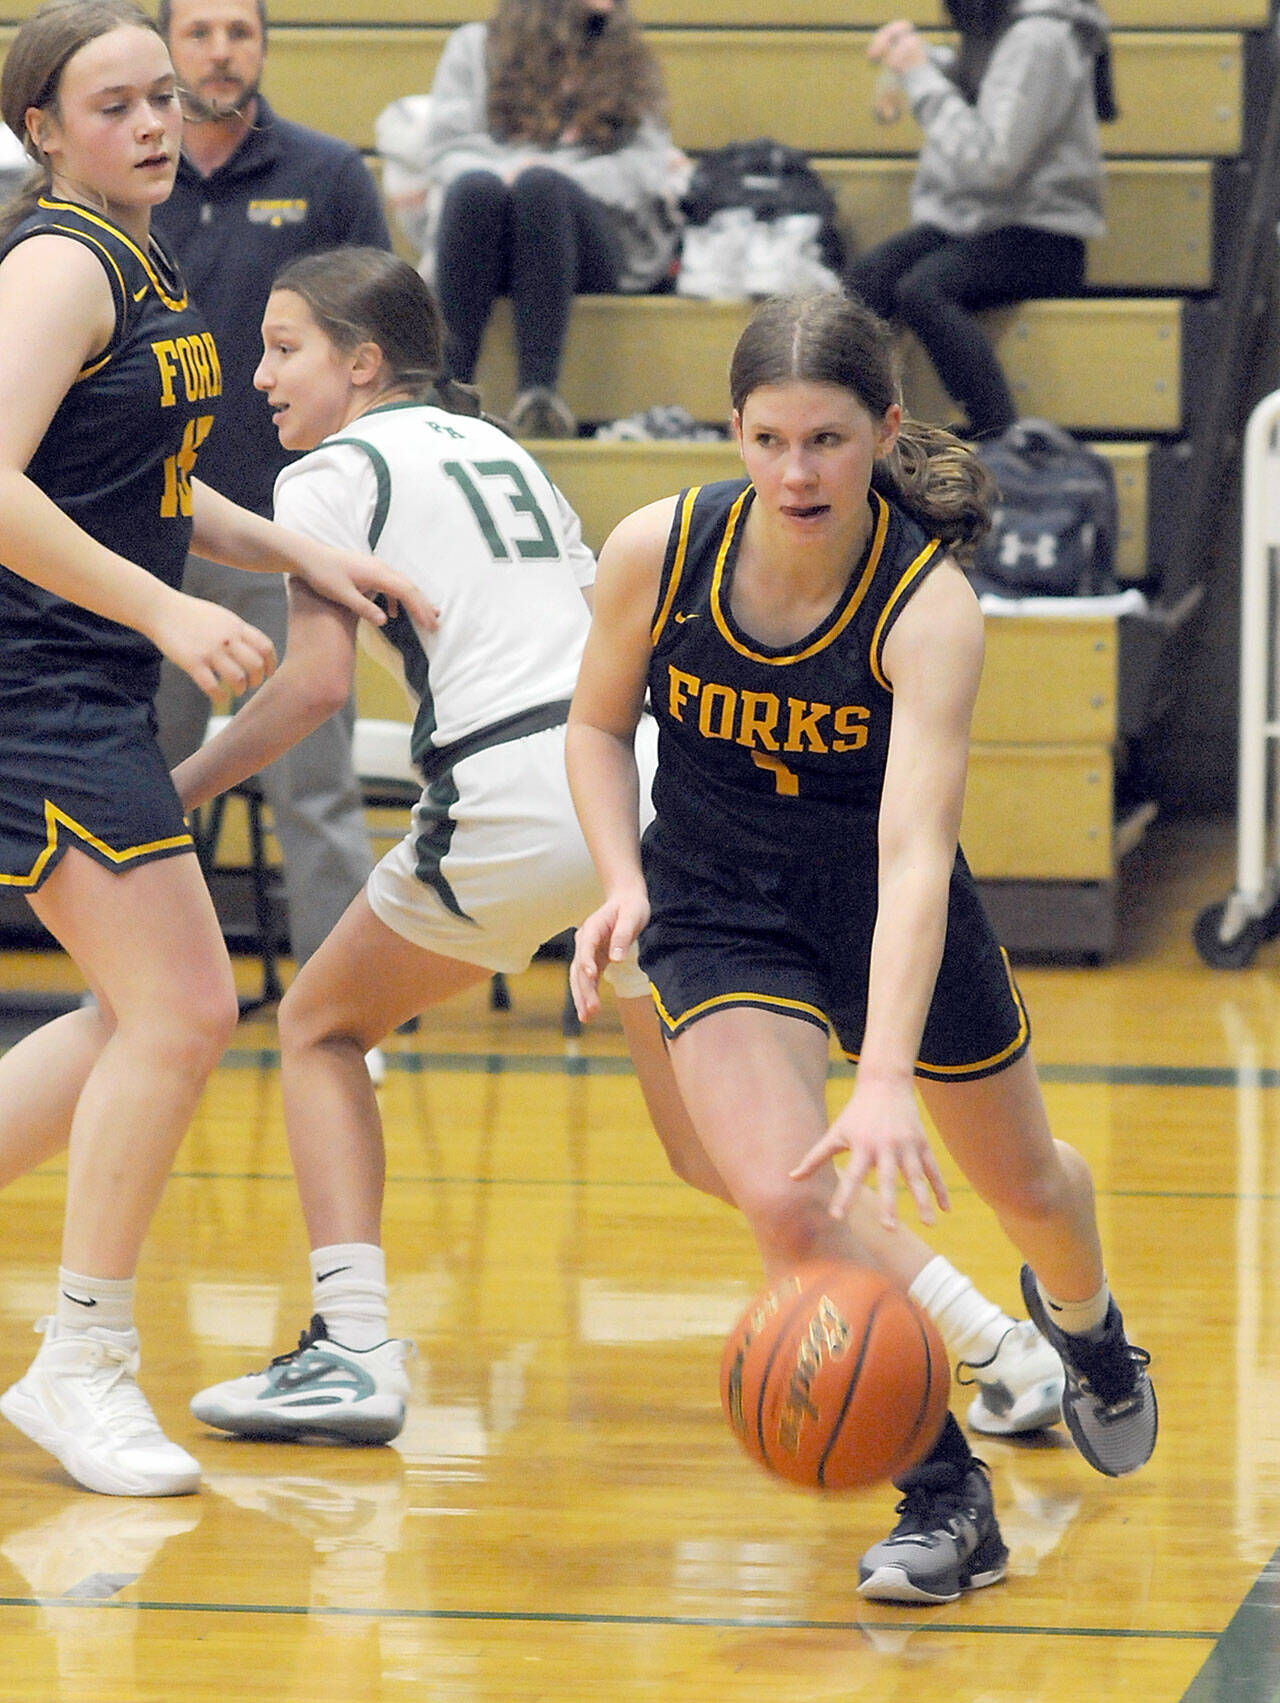 GIRLS BASKETBALL PREVIEW: Forks looks to blend youth